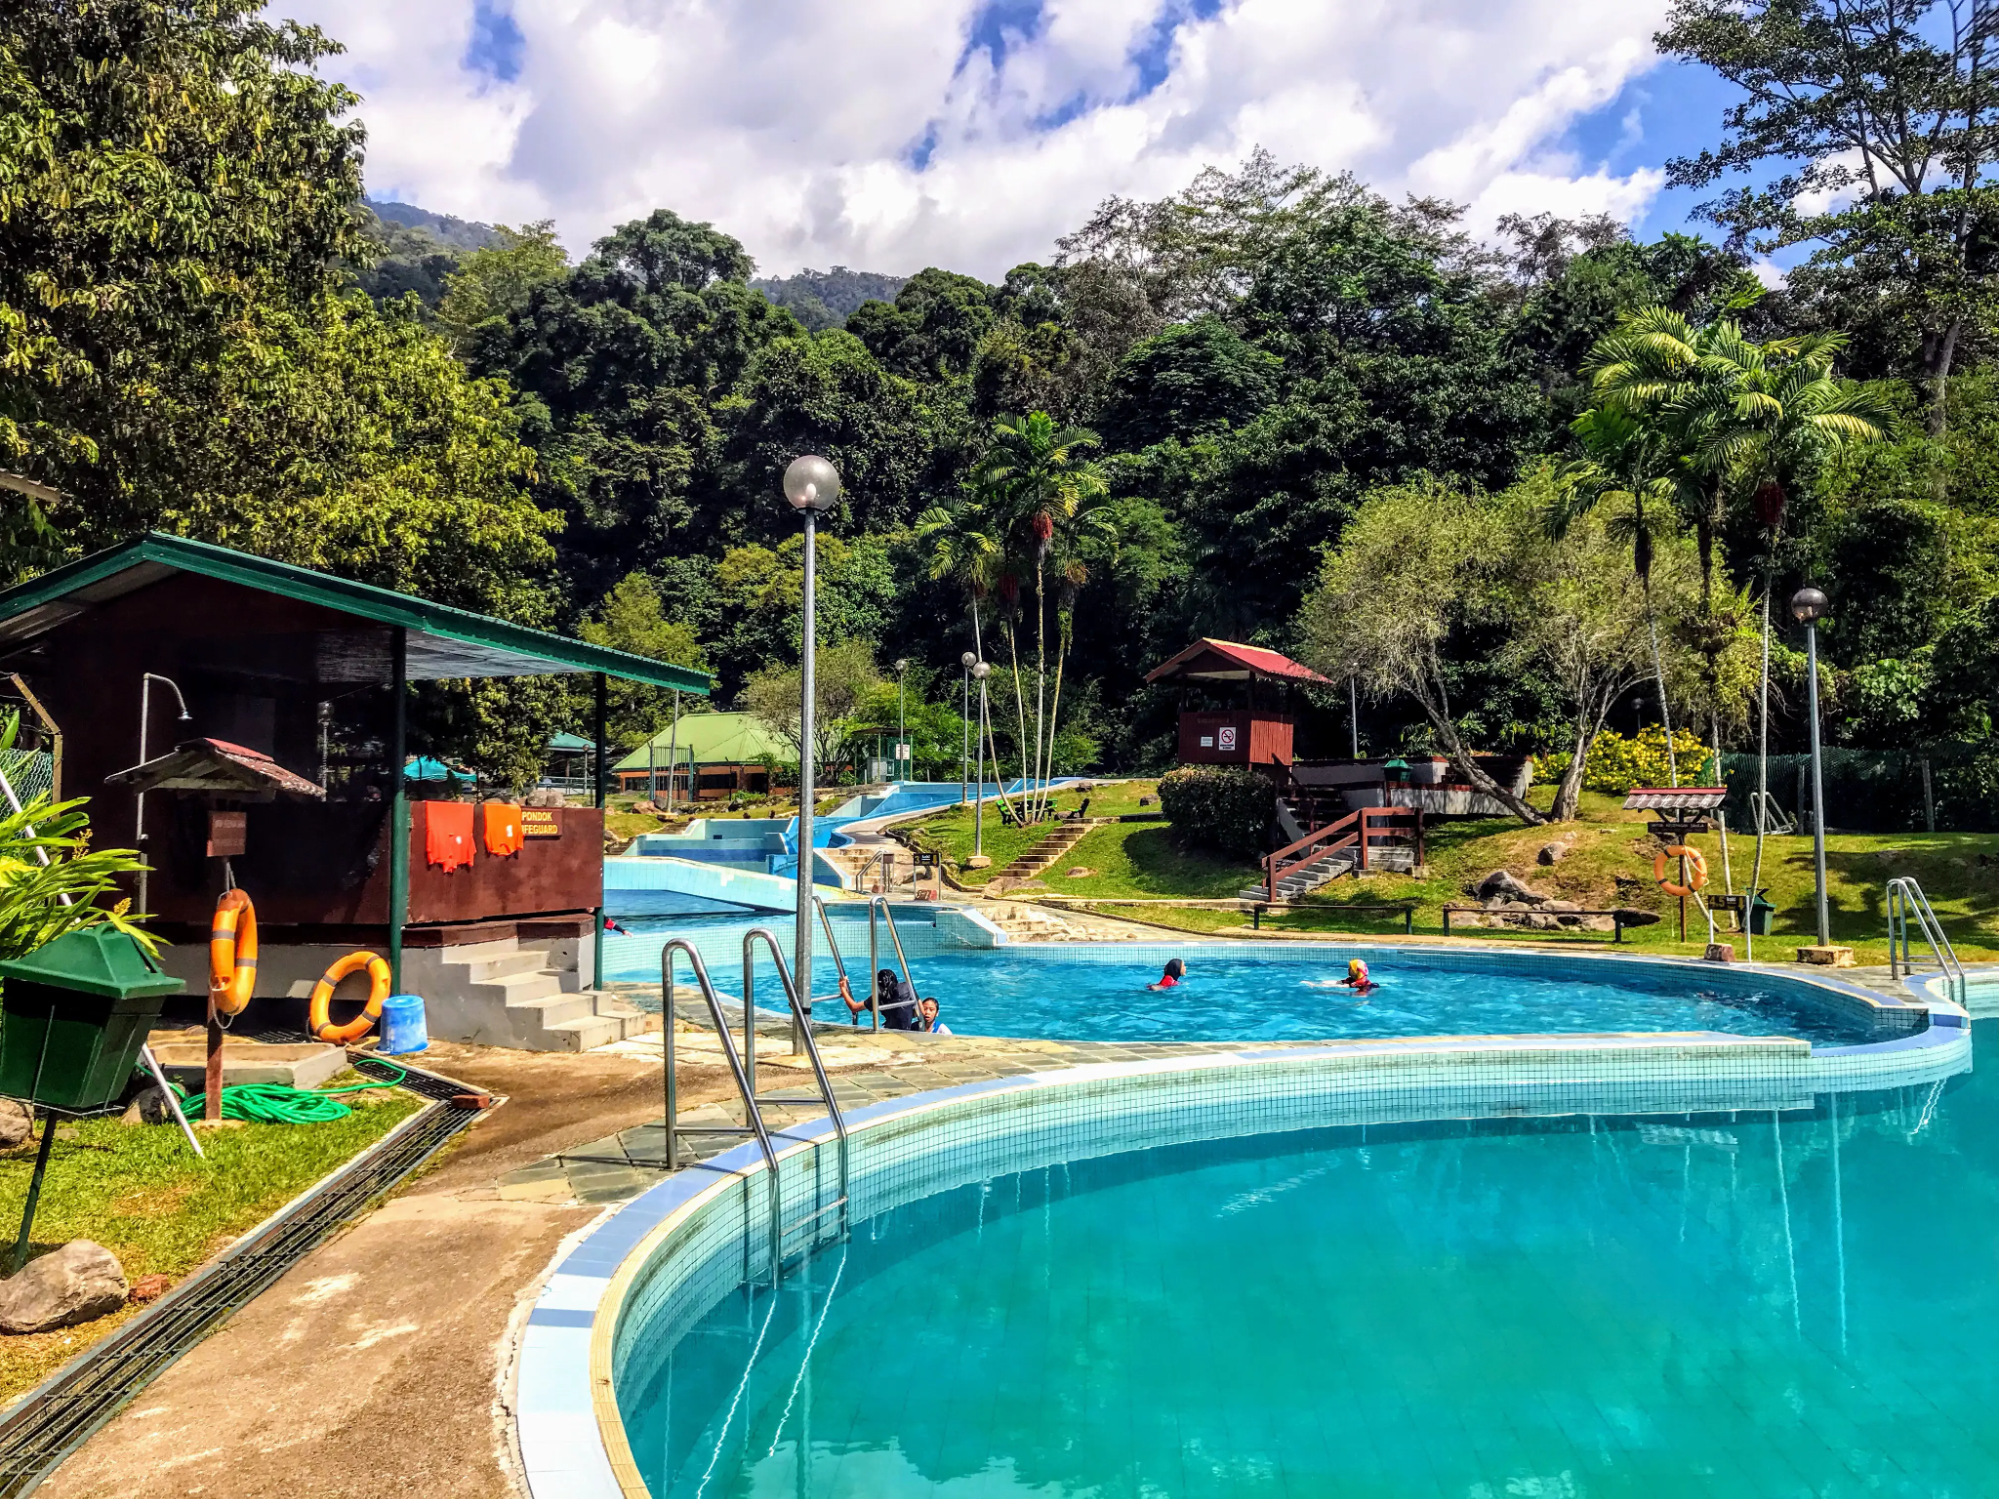 Public pools at Poring Hot Springs, a popular tourist attraction in Sabah